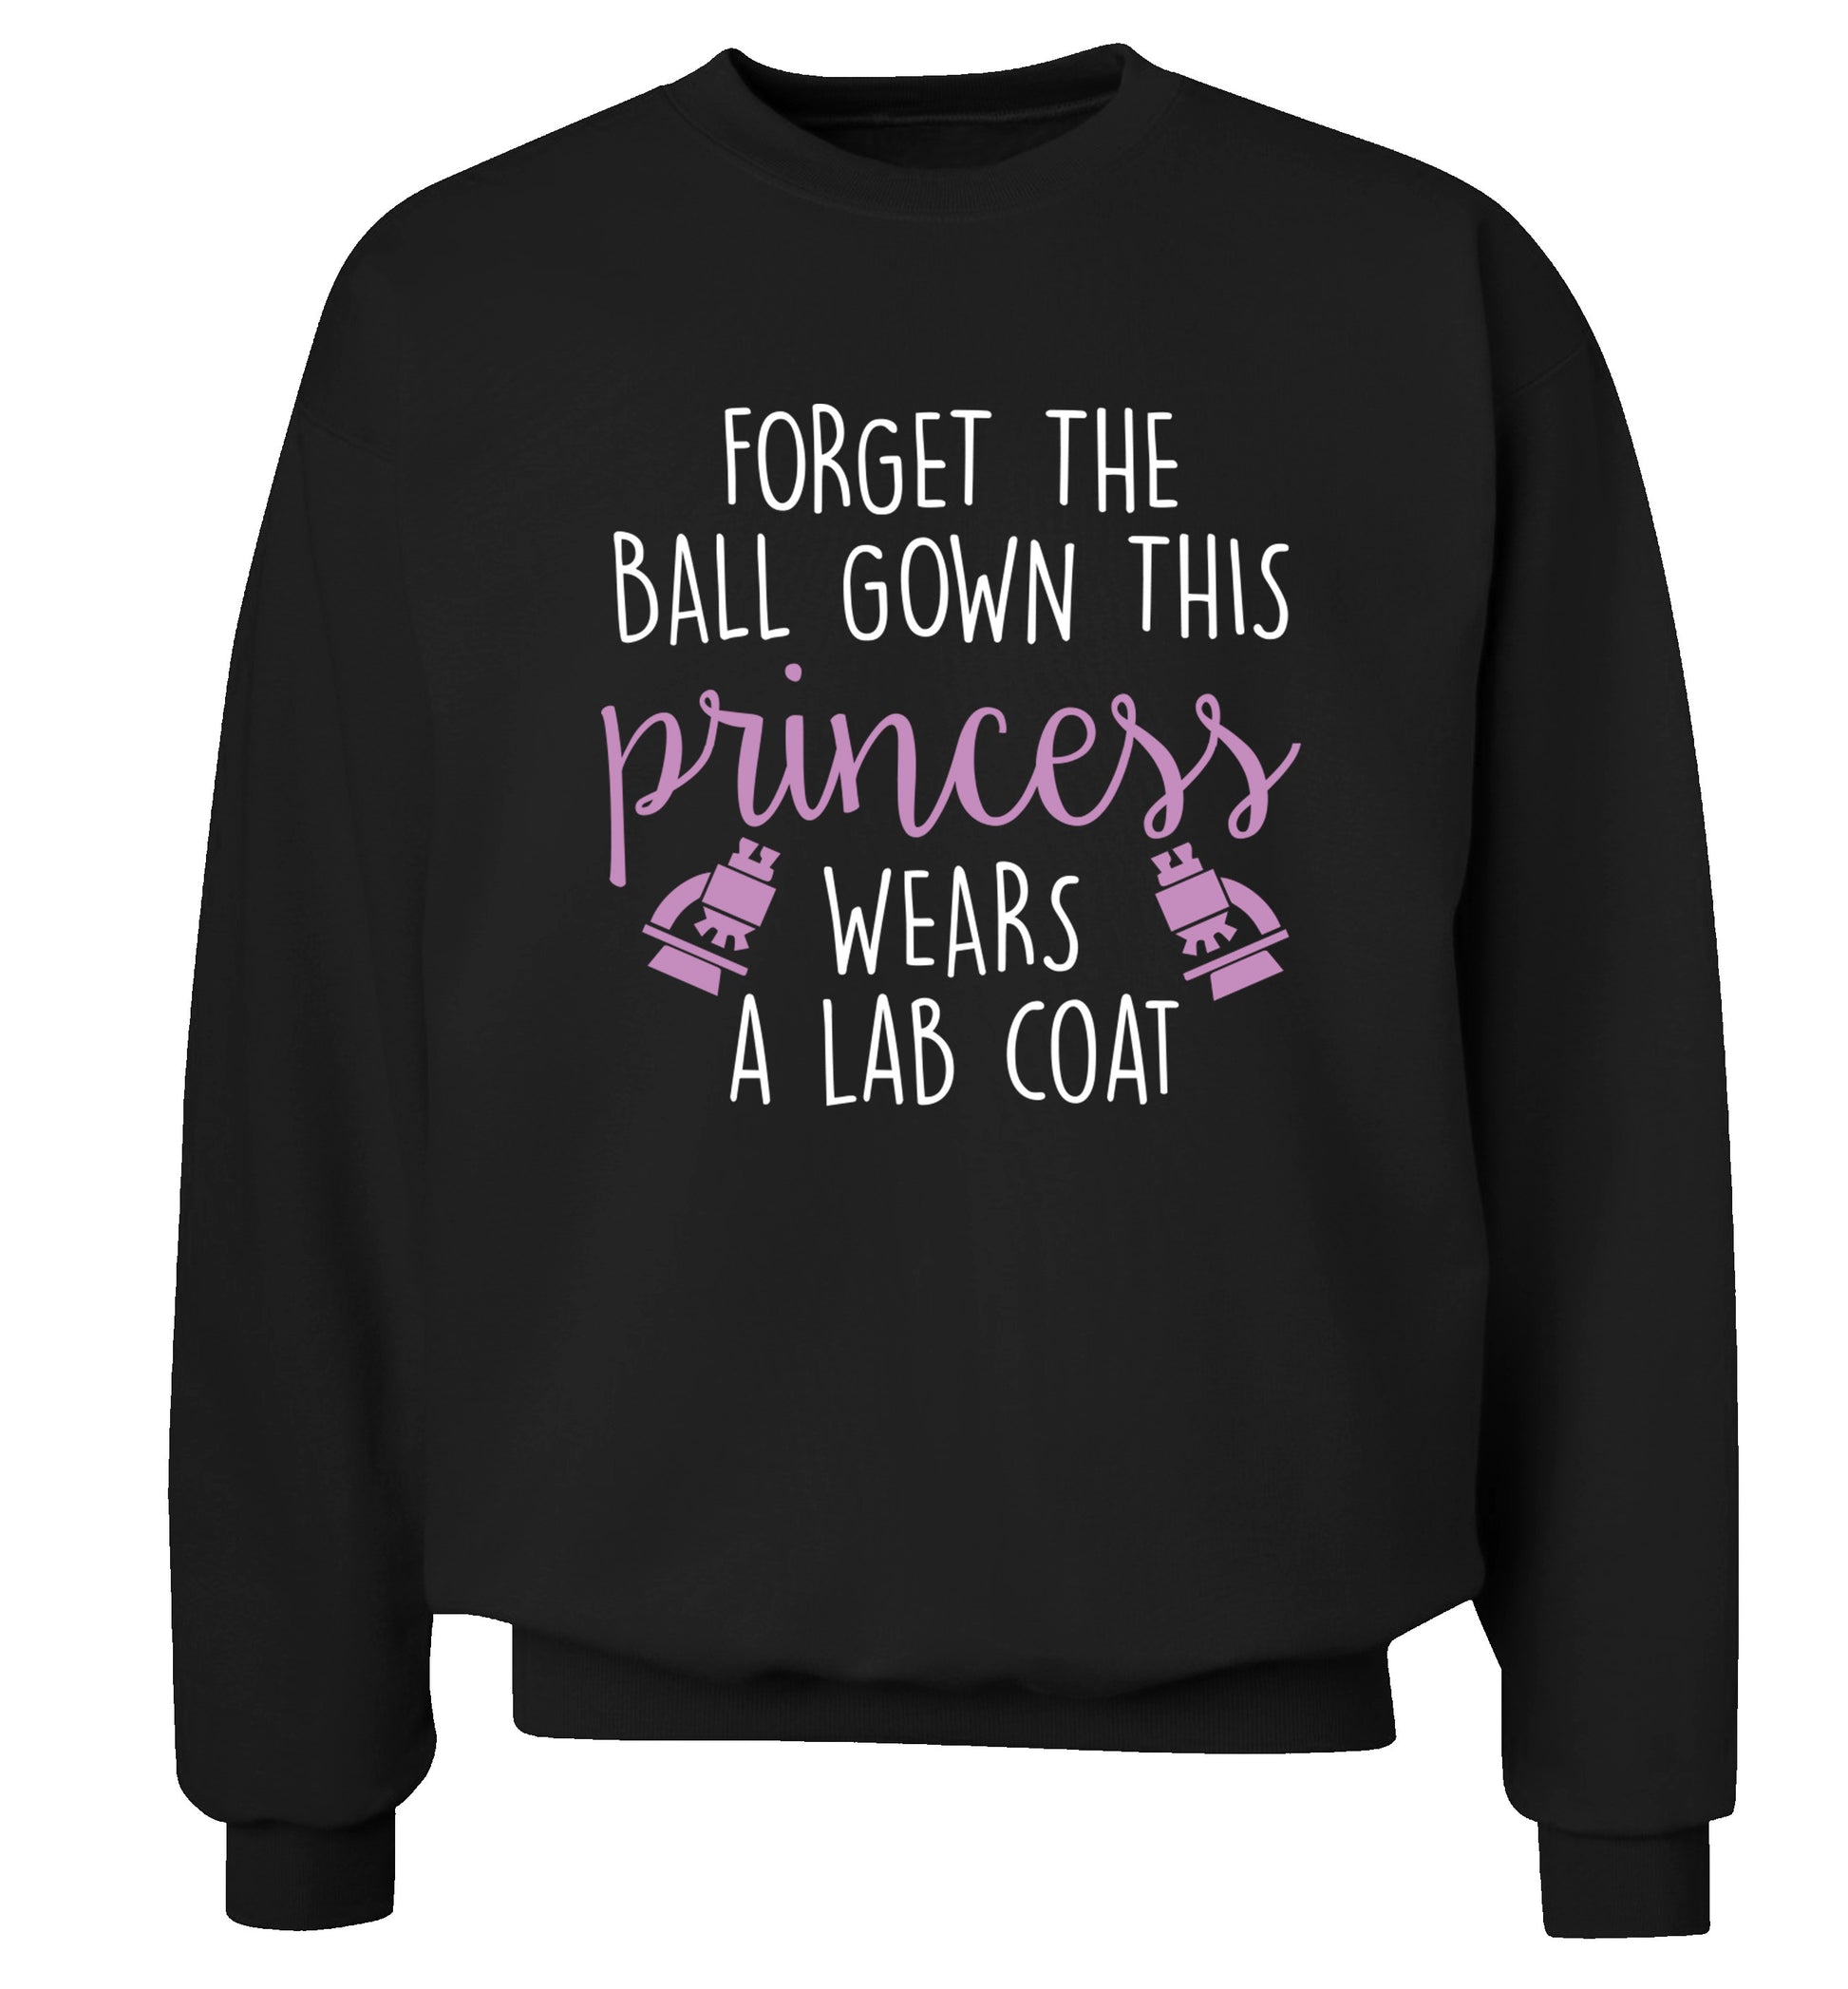 Forget the ball gown this princess wears a lab coat Adult's unisex black Sweater 2XL